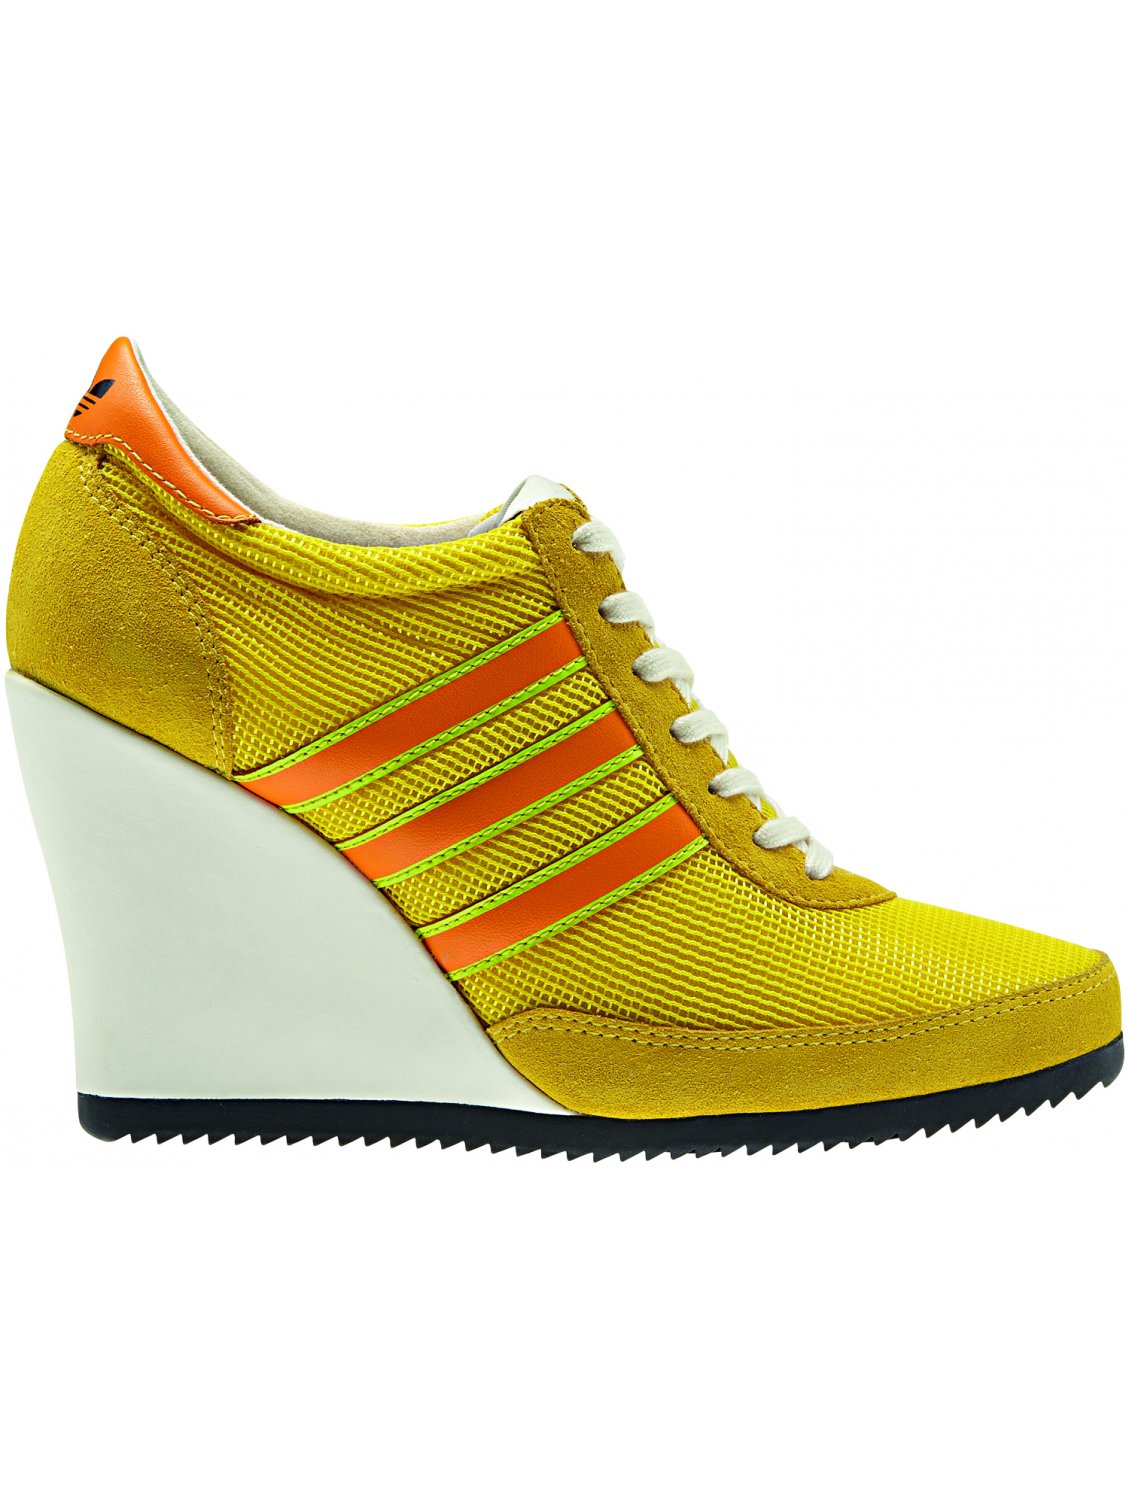 Jeremy scott for adidas Wedge Sneakers in Yellow | Lyst